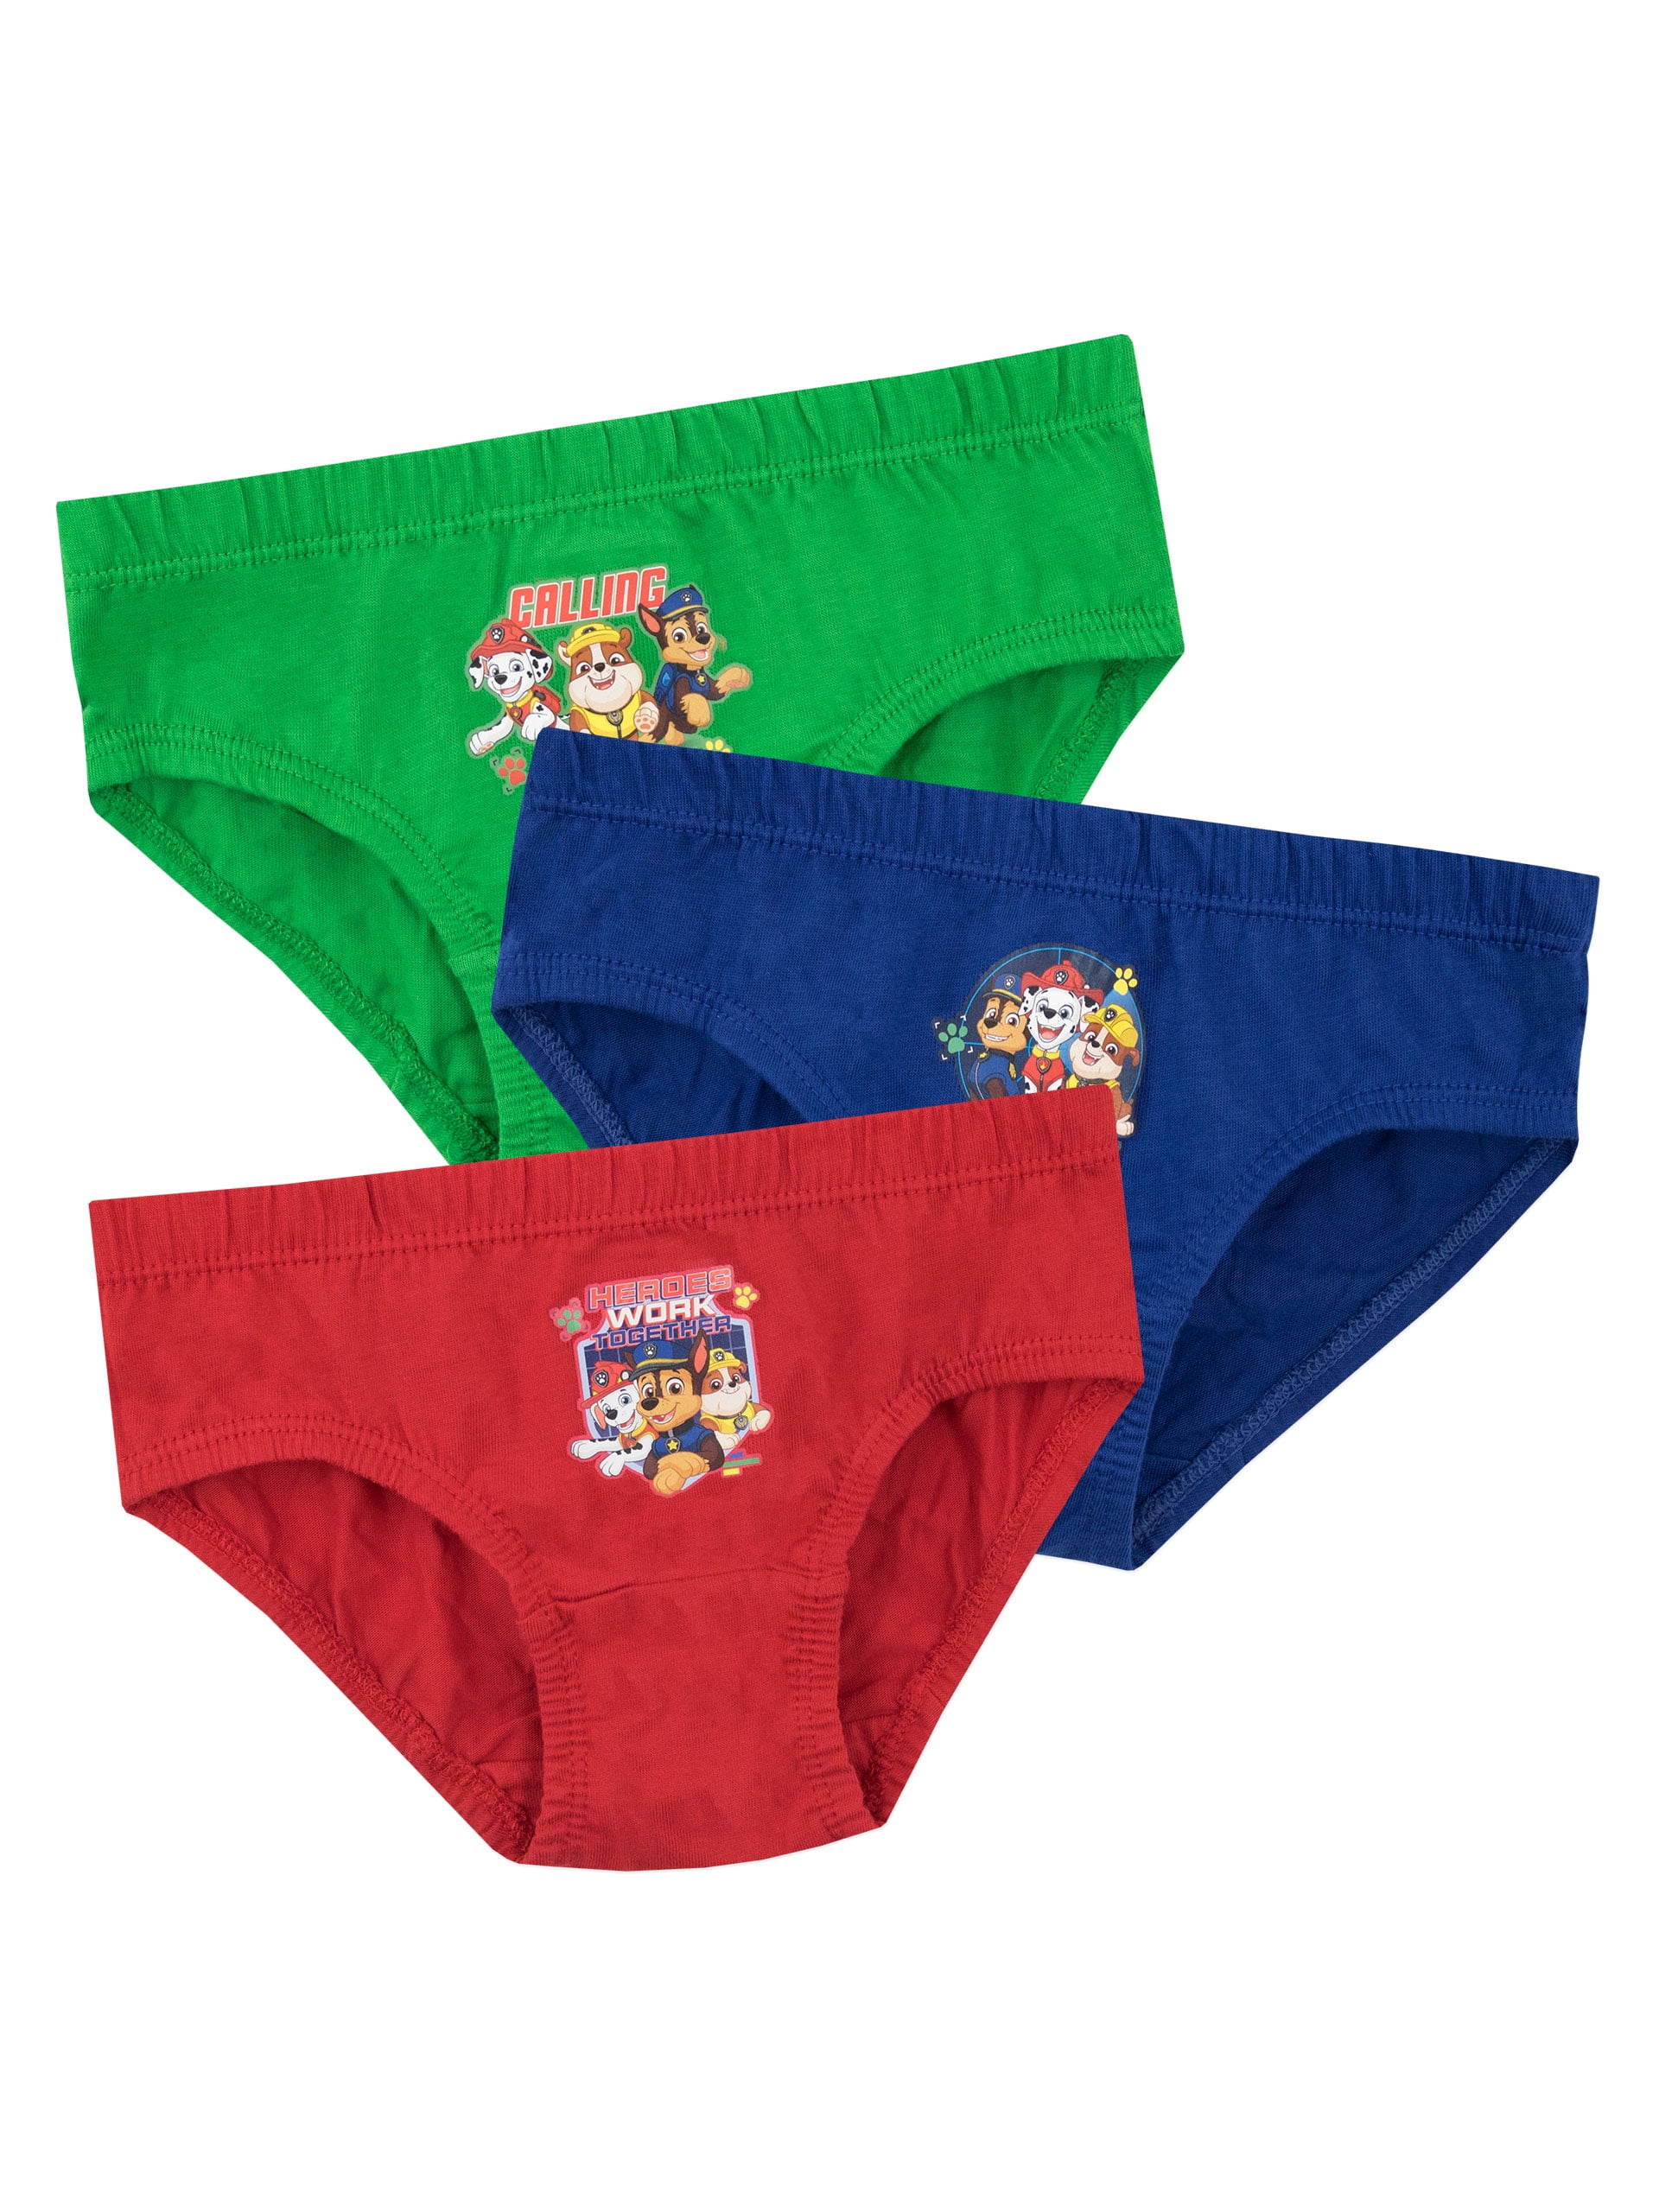 Paw Patrol Toddler Girl Briefs, 7-Pack, Sizes 2T-4T